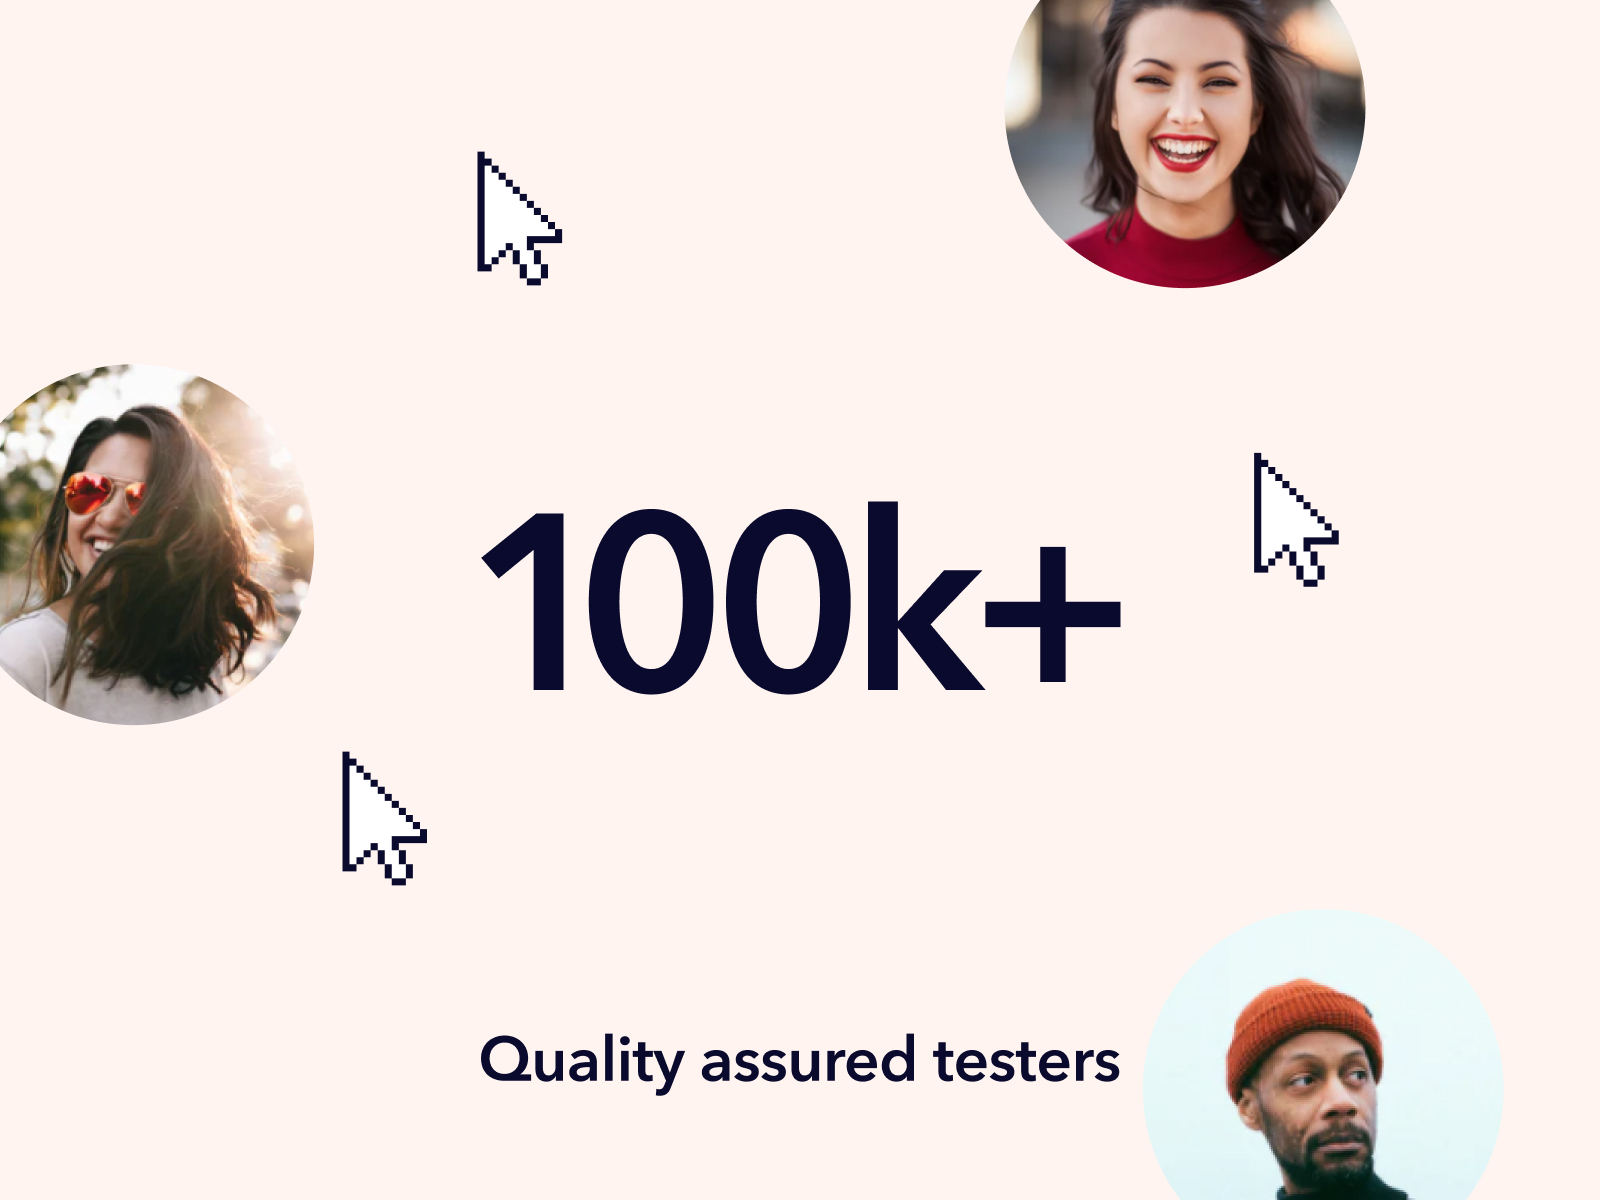 More than 100k+ Quality Assured Testers